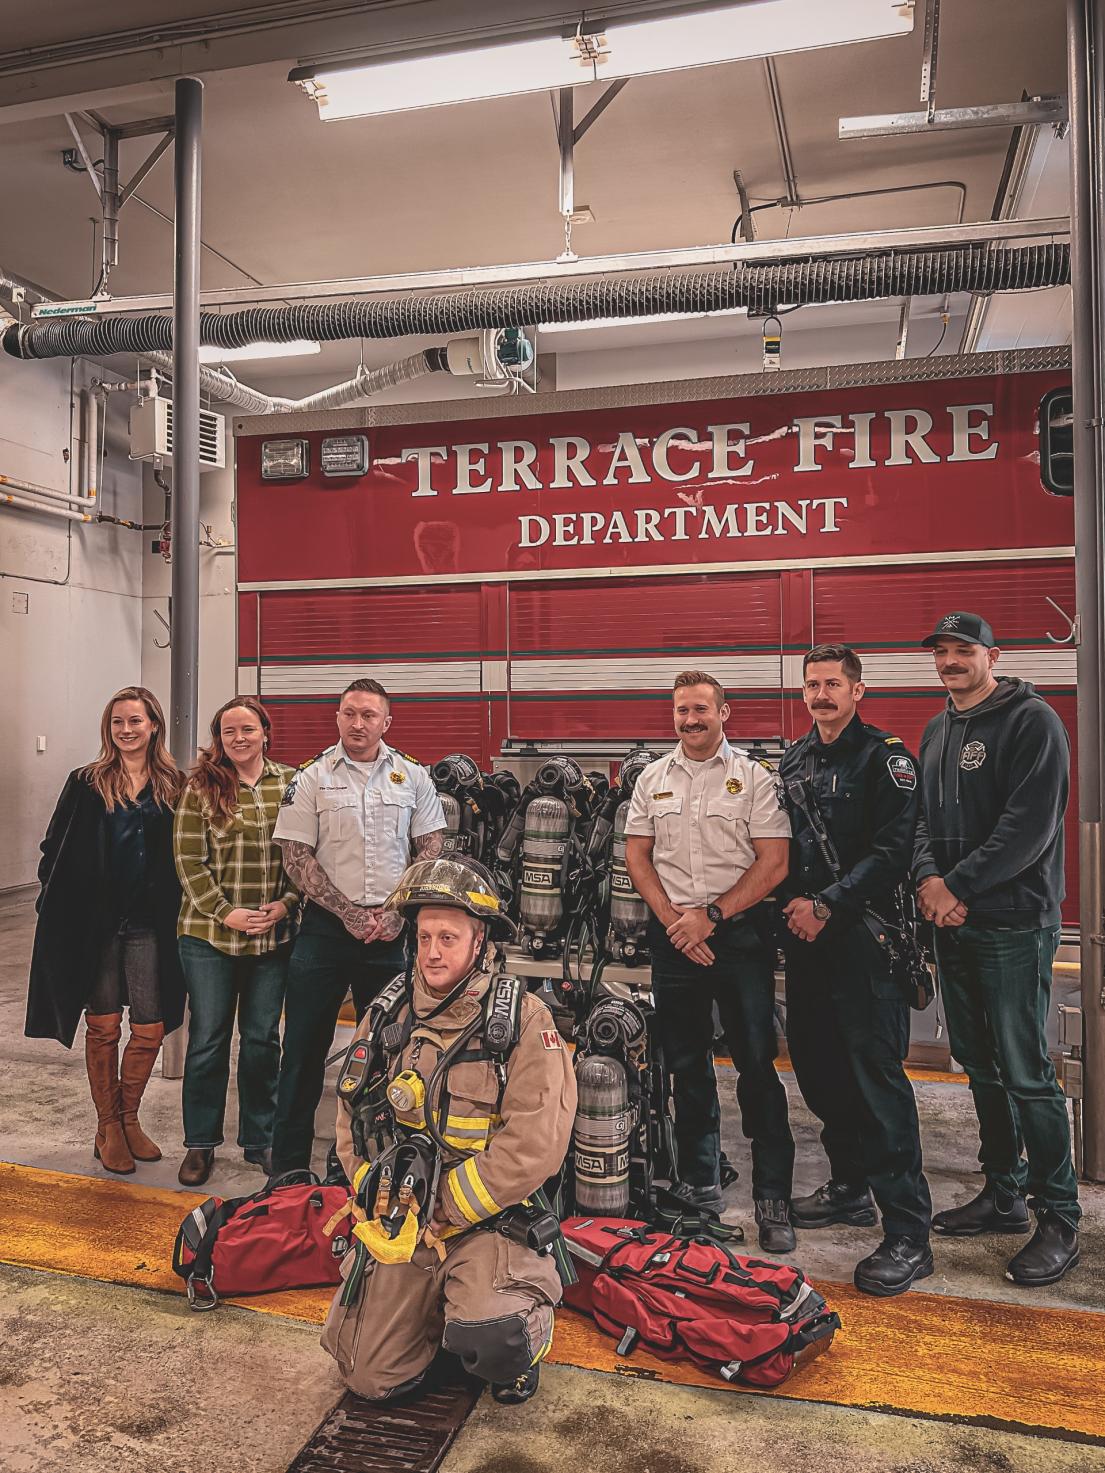 A group photo of fire department staff and others featuring new fire department equipment